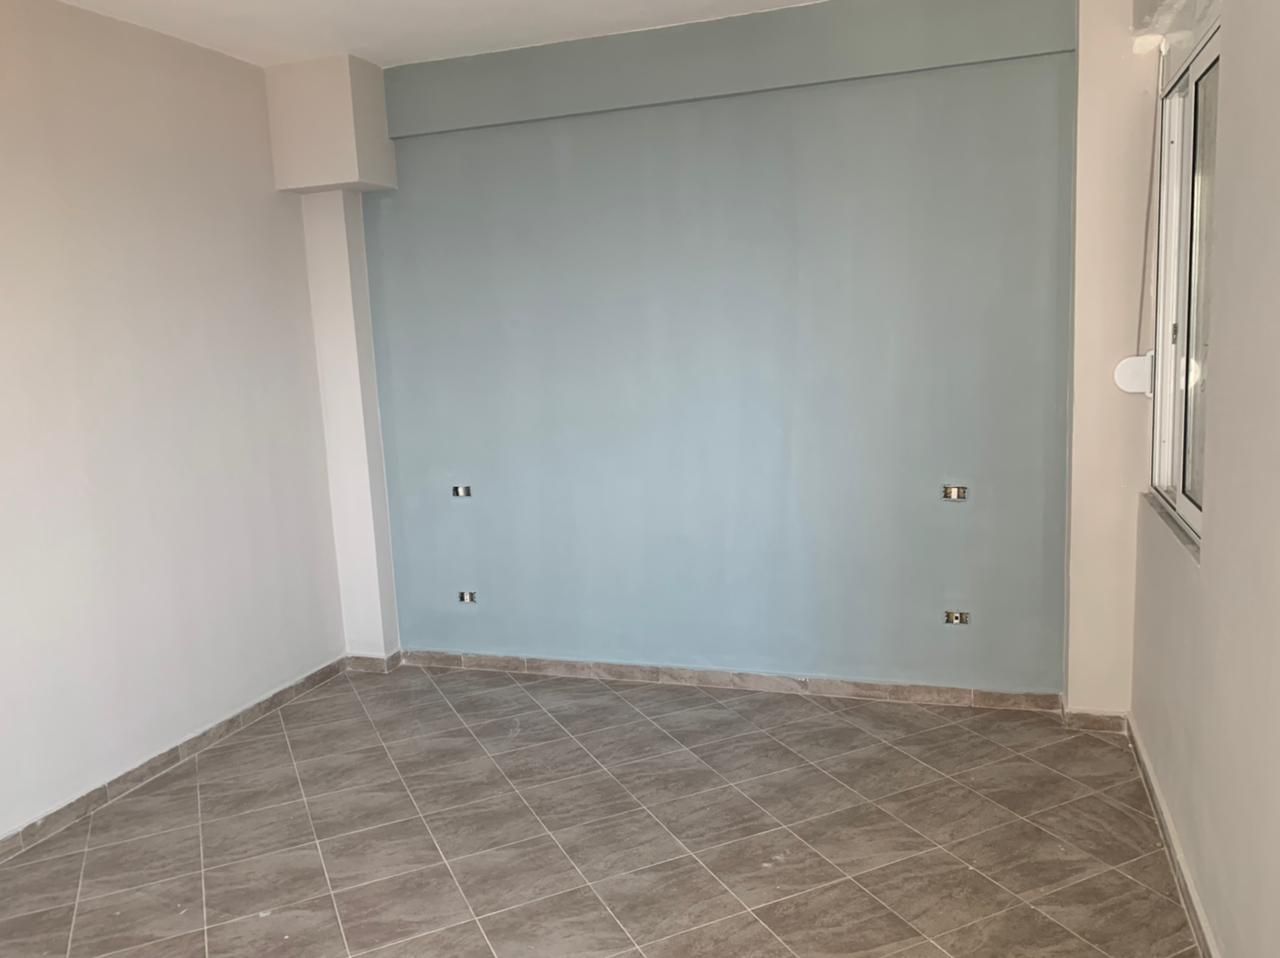 APARTMENT FOR SALE IN SARANDA.ONE BEDROOM APARTMENTS 